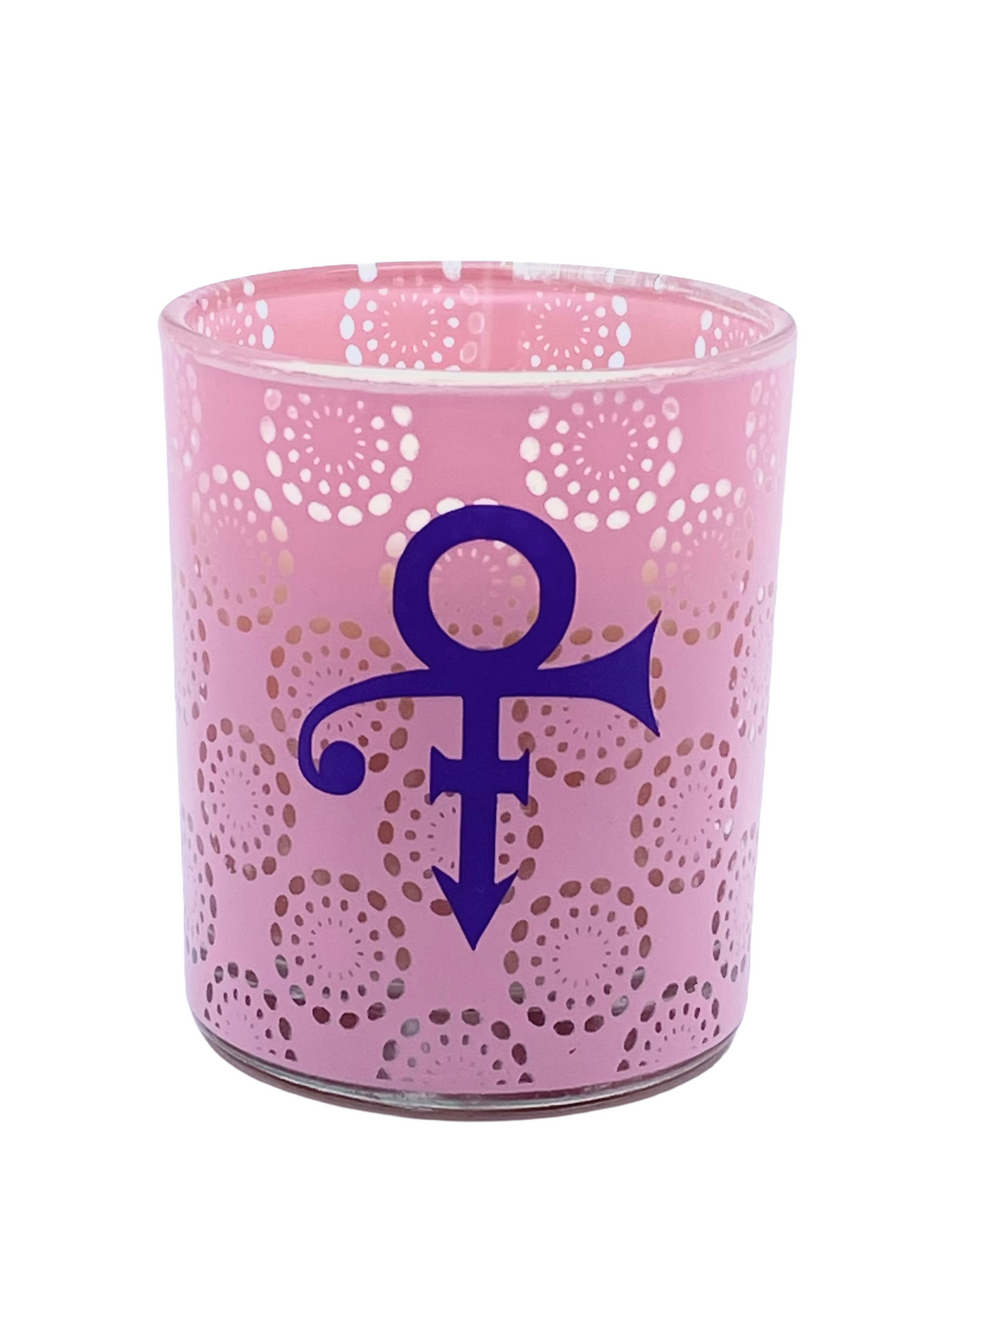 Prince – NPG Store Official Merchandise Small Candle In Holder Pink Love Symbol Prince